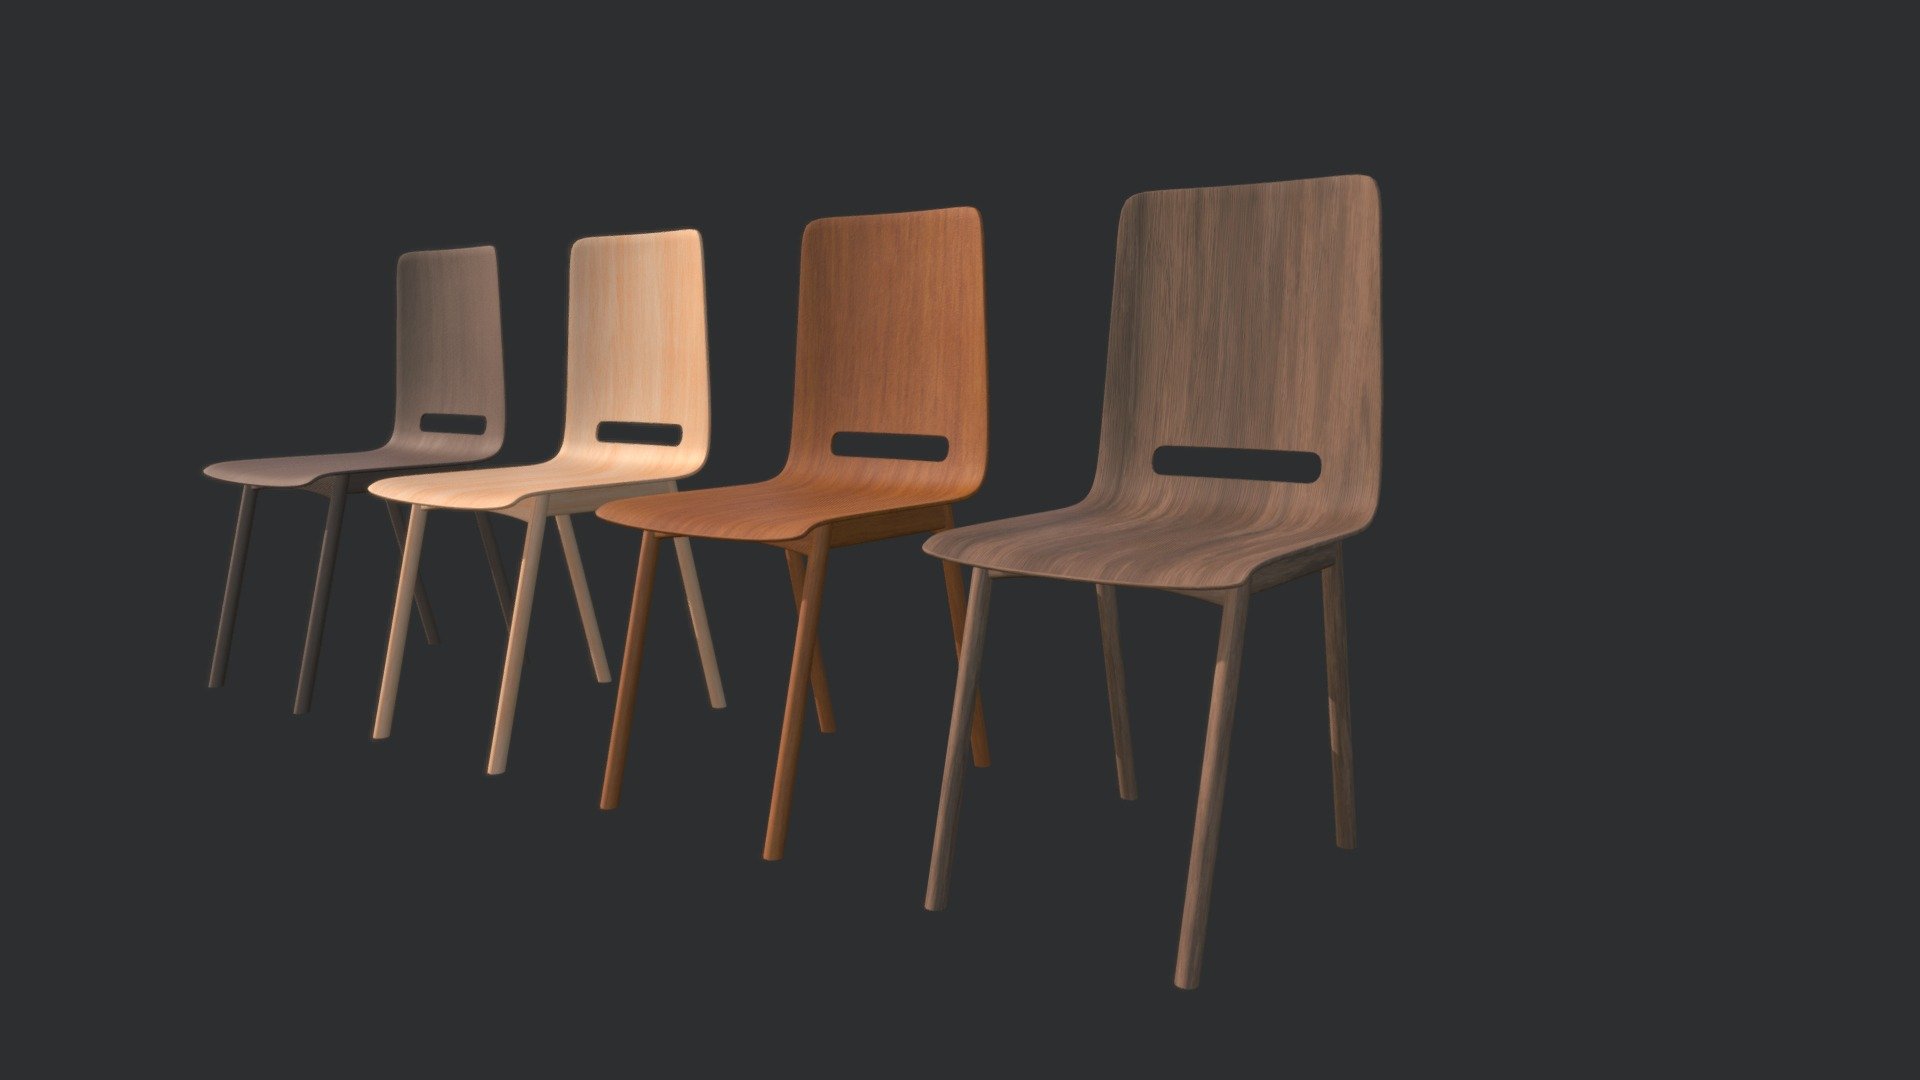 Wooden chair in 4 different textures from https://ambientcg.com/
Software used: blender - Wooden Modern Chairs - 3D model by MarcangangeloDiAlberobello 3d model